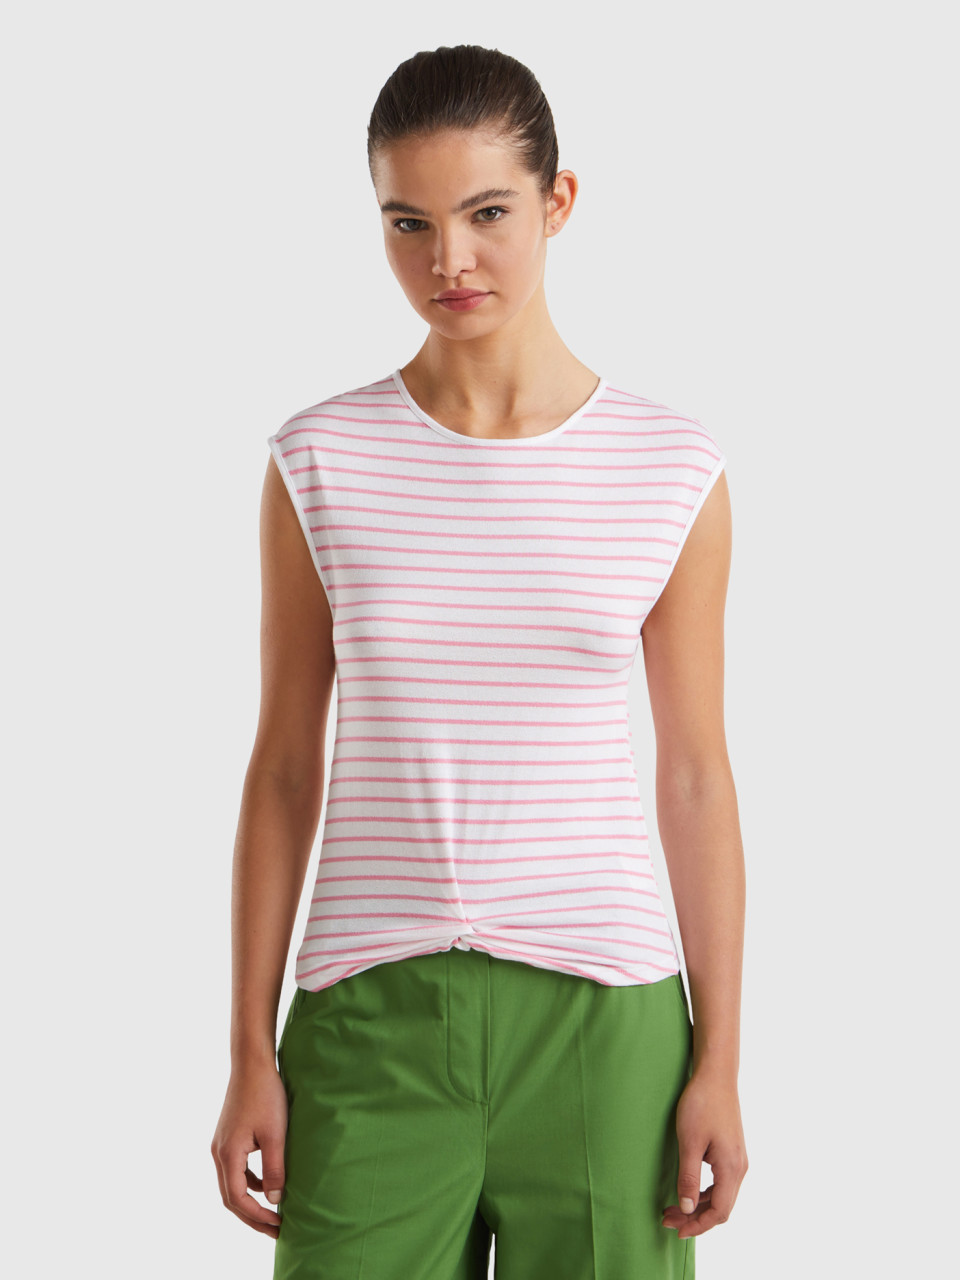 Benetton, Striped T-shirt With Knot, Pink, Women